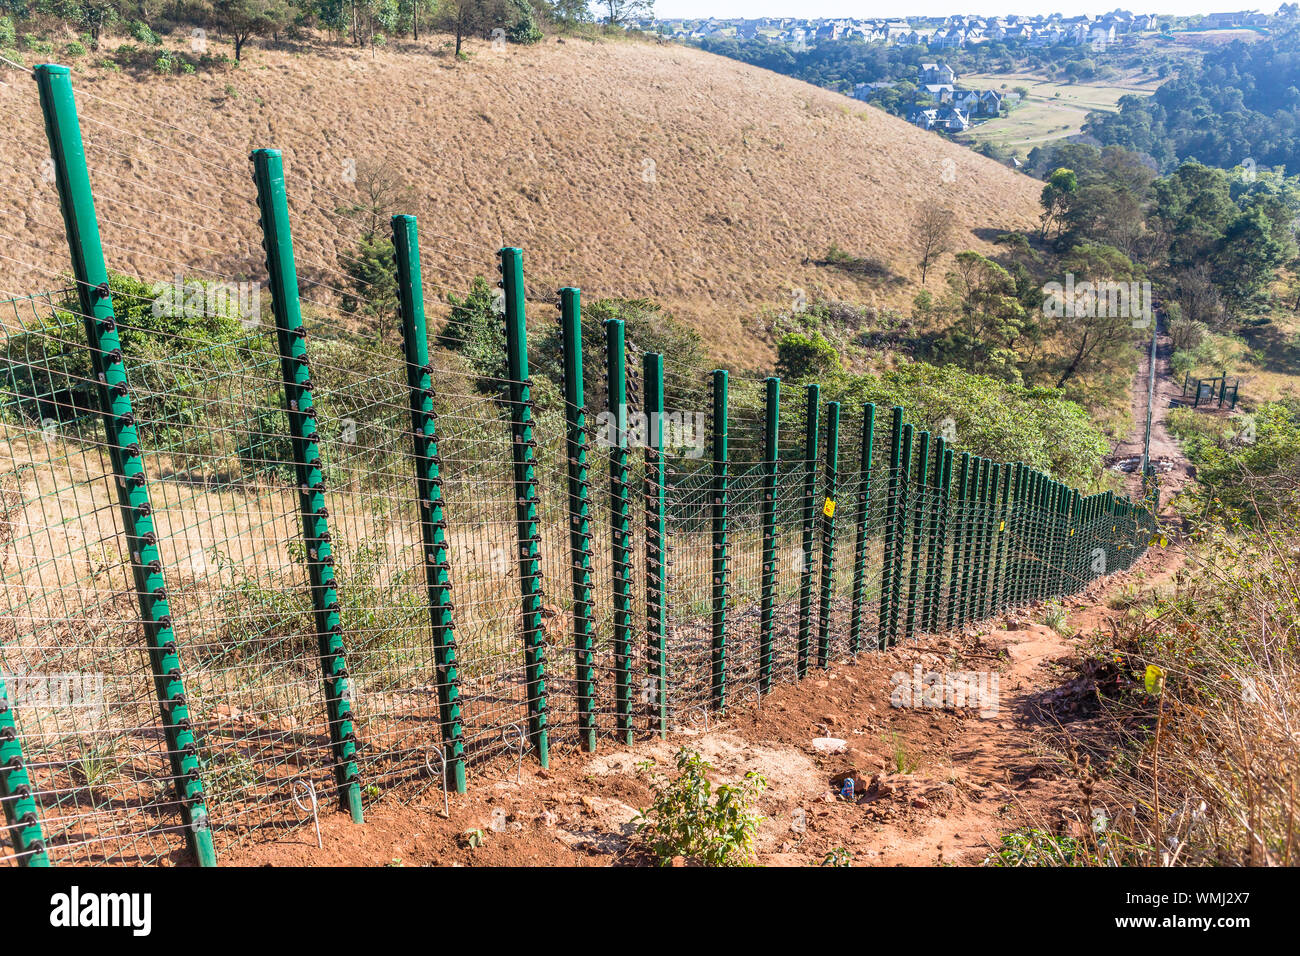 New Security electrified fence constructed in rural countryside valley landscape Stock Photo